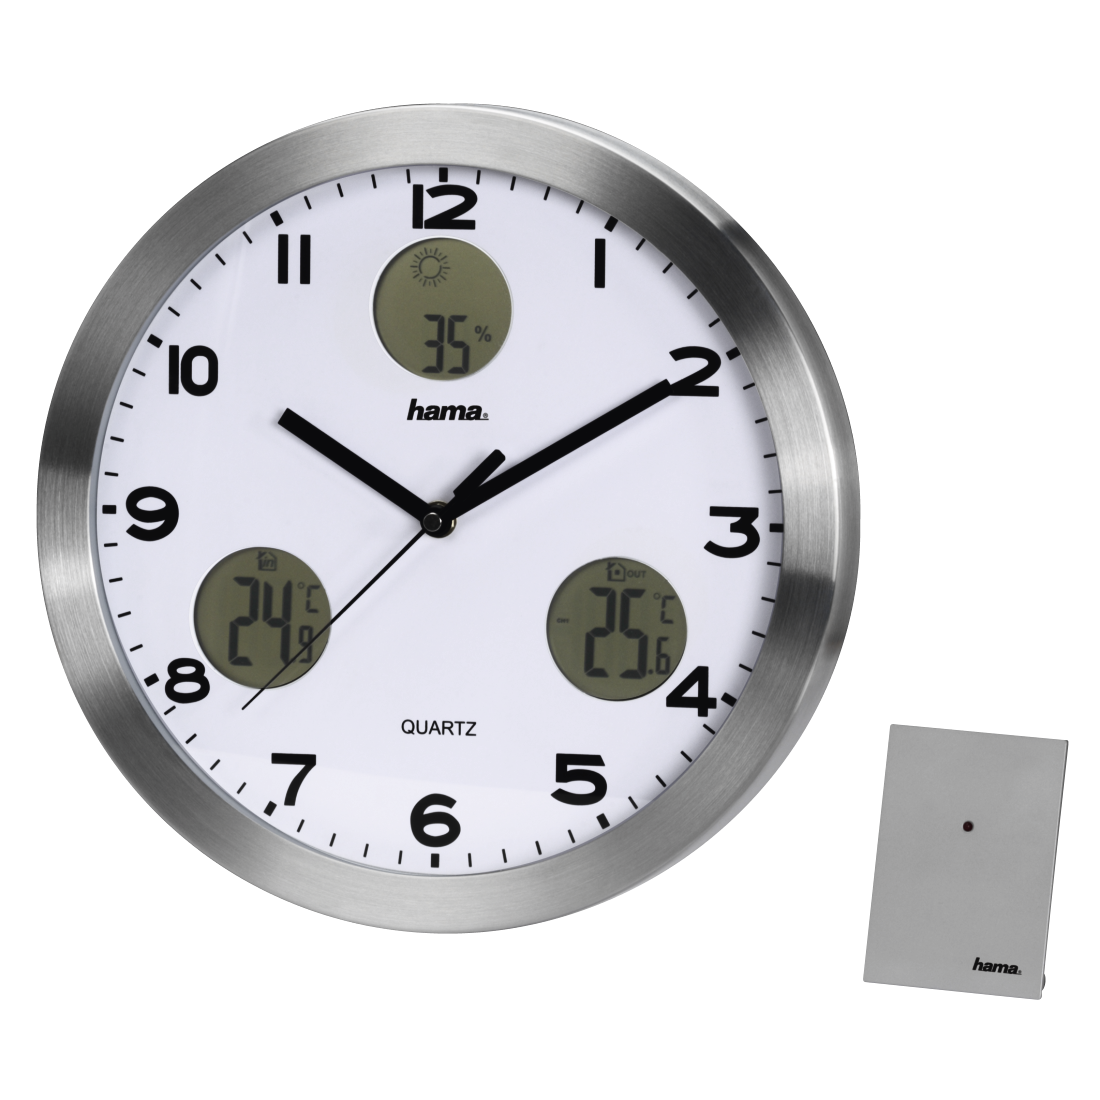 00113982 Hama "AG-300" Wall Clock, with weather station